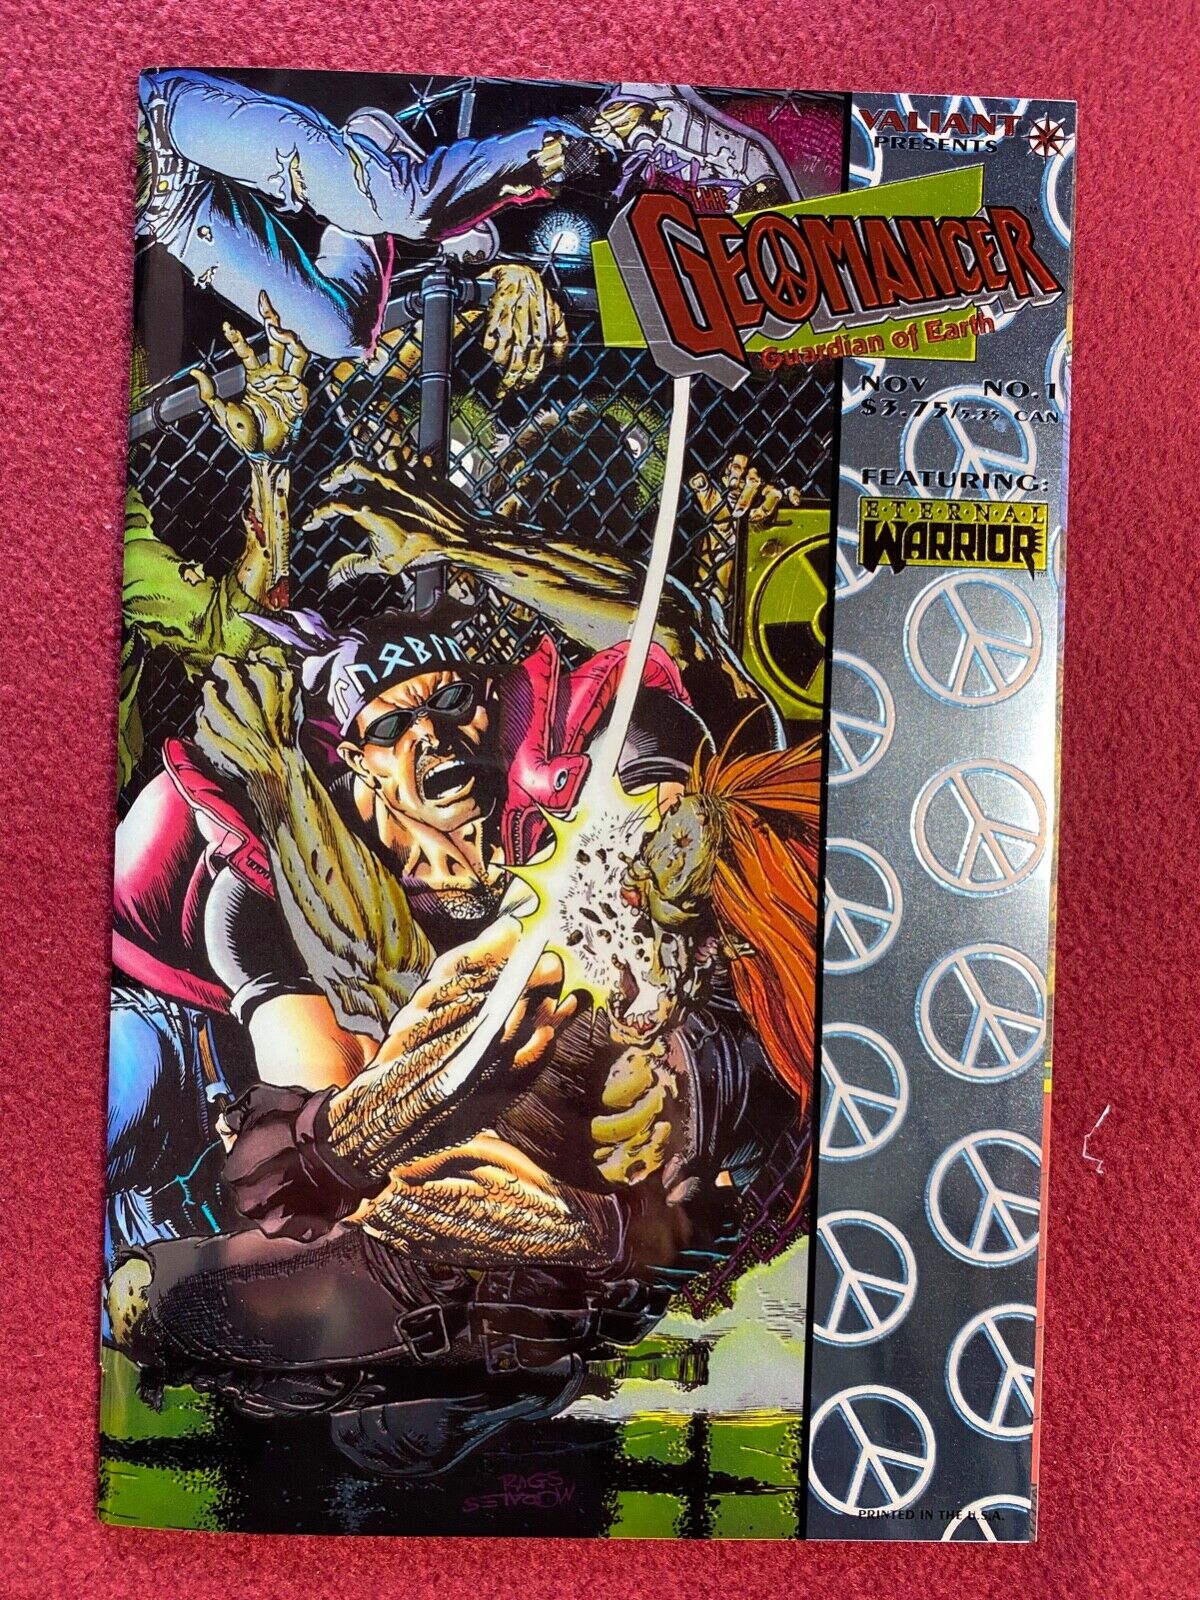 Geomancer #1 - Valiant Comics - Check out this stupid foil cover